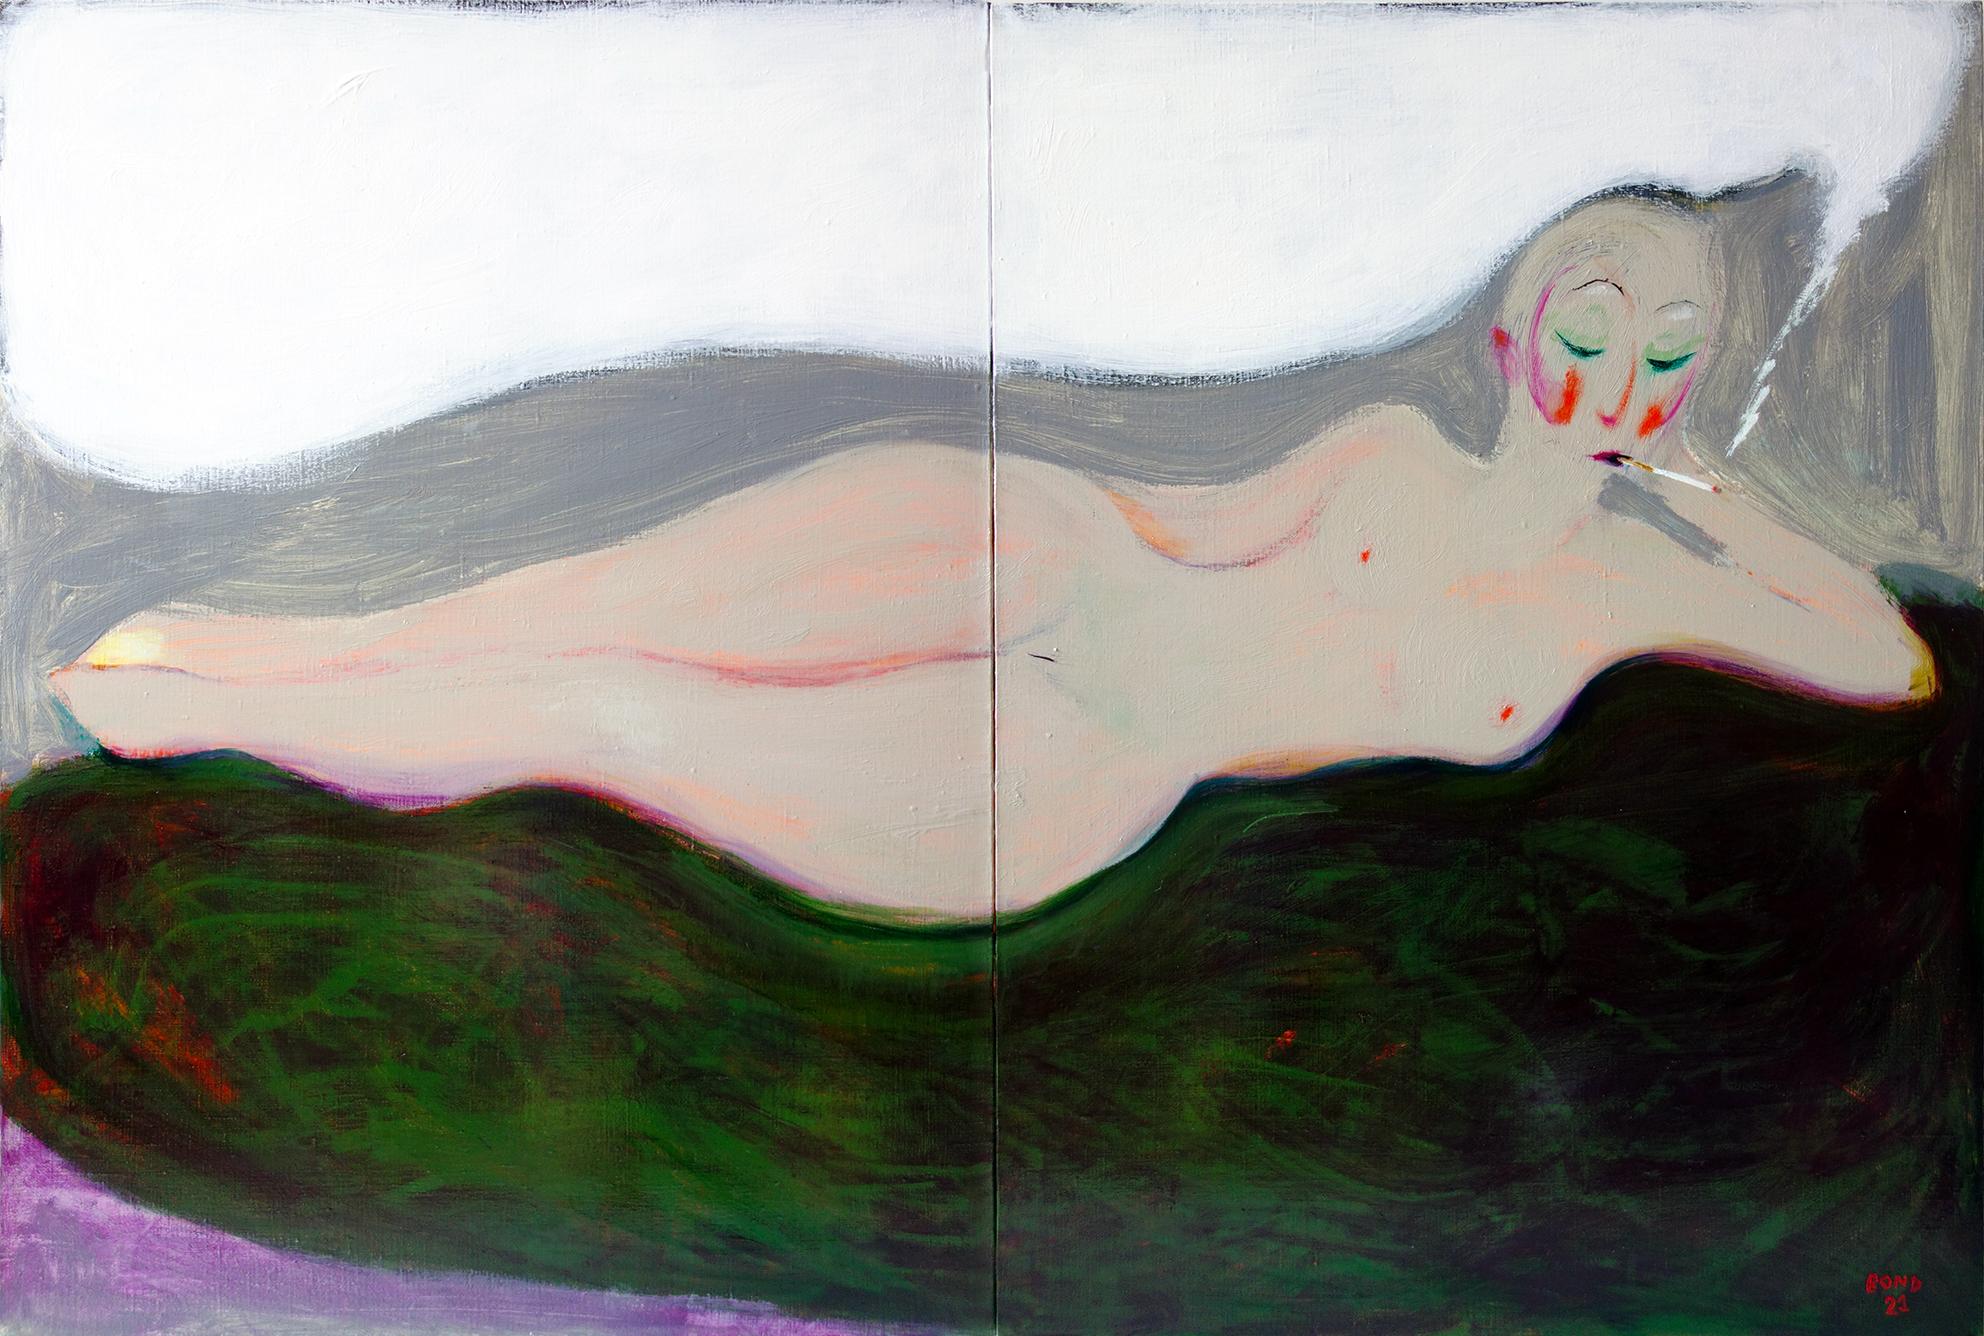 Sergey Bondarev Nude Painting - Nude on a green blanket . Diptych Portrait Painting Acrylic Woman Grey Red Lips